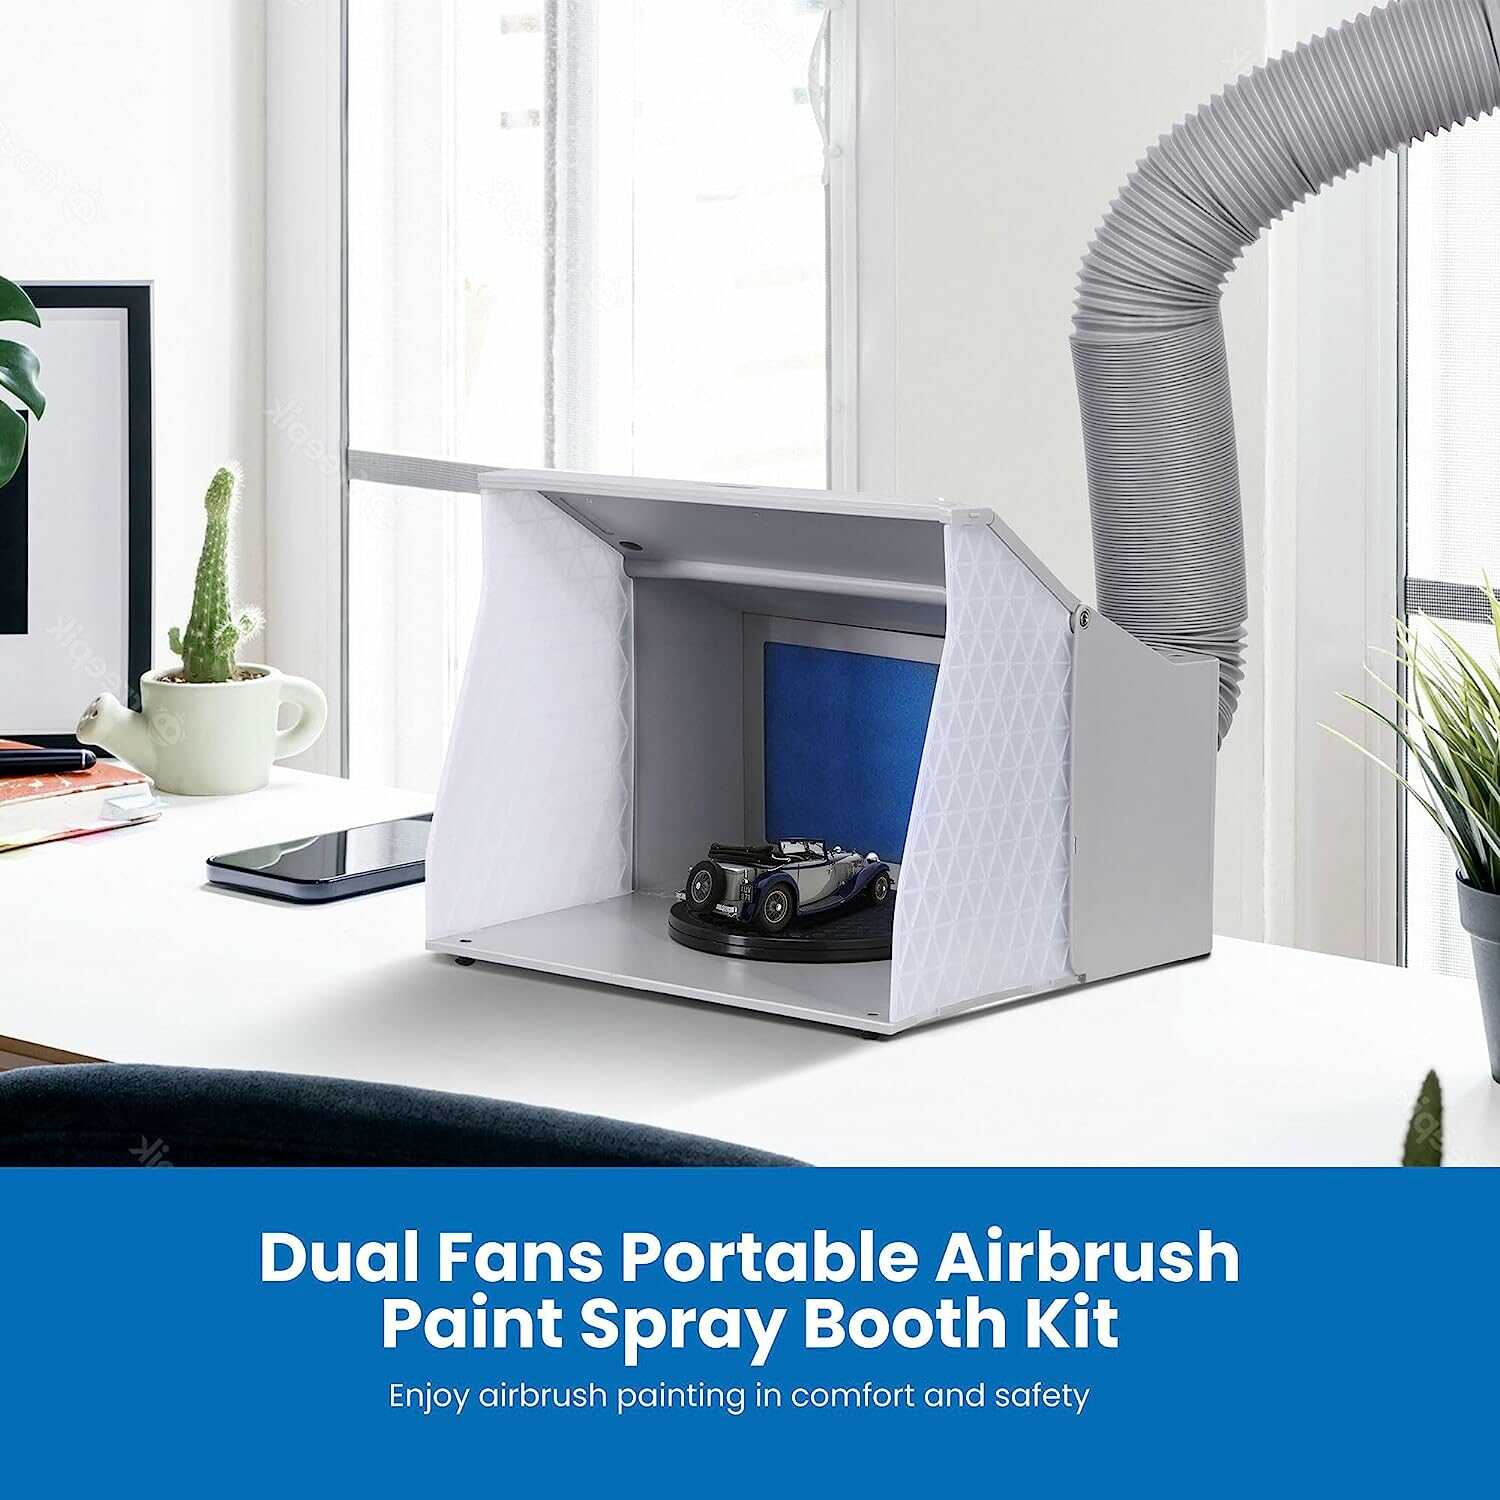 Portable Airbrush booth with filter